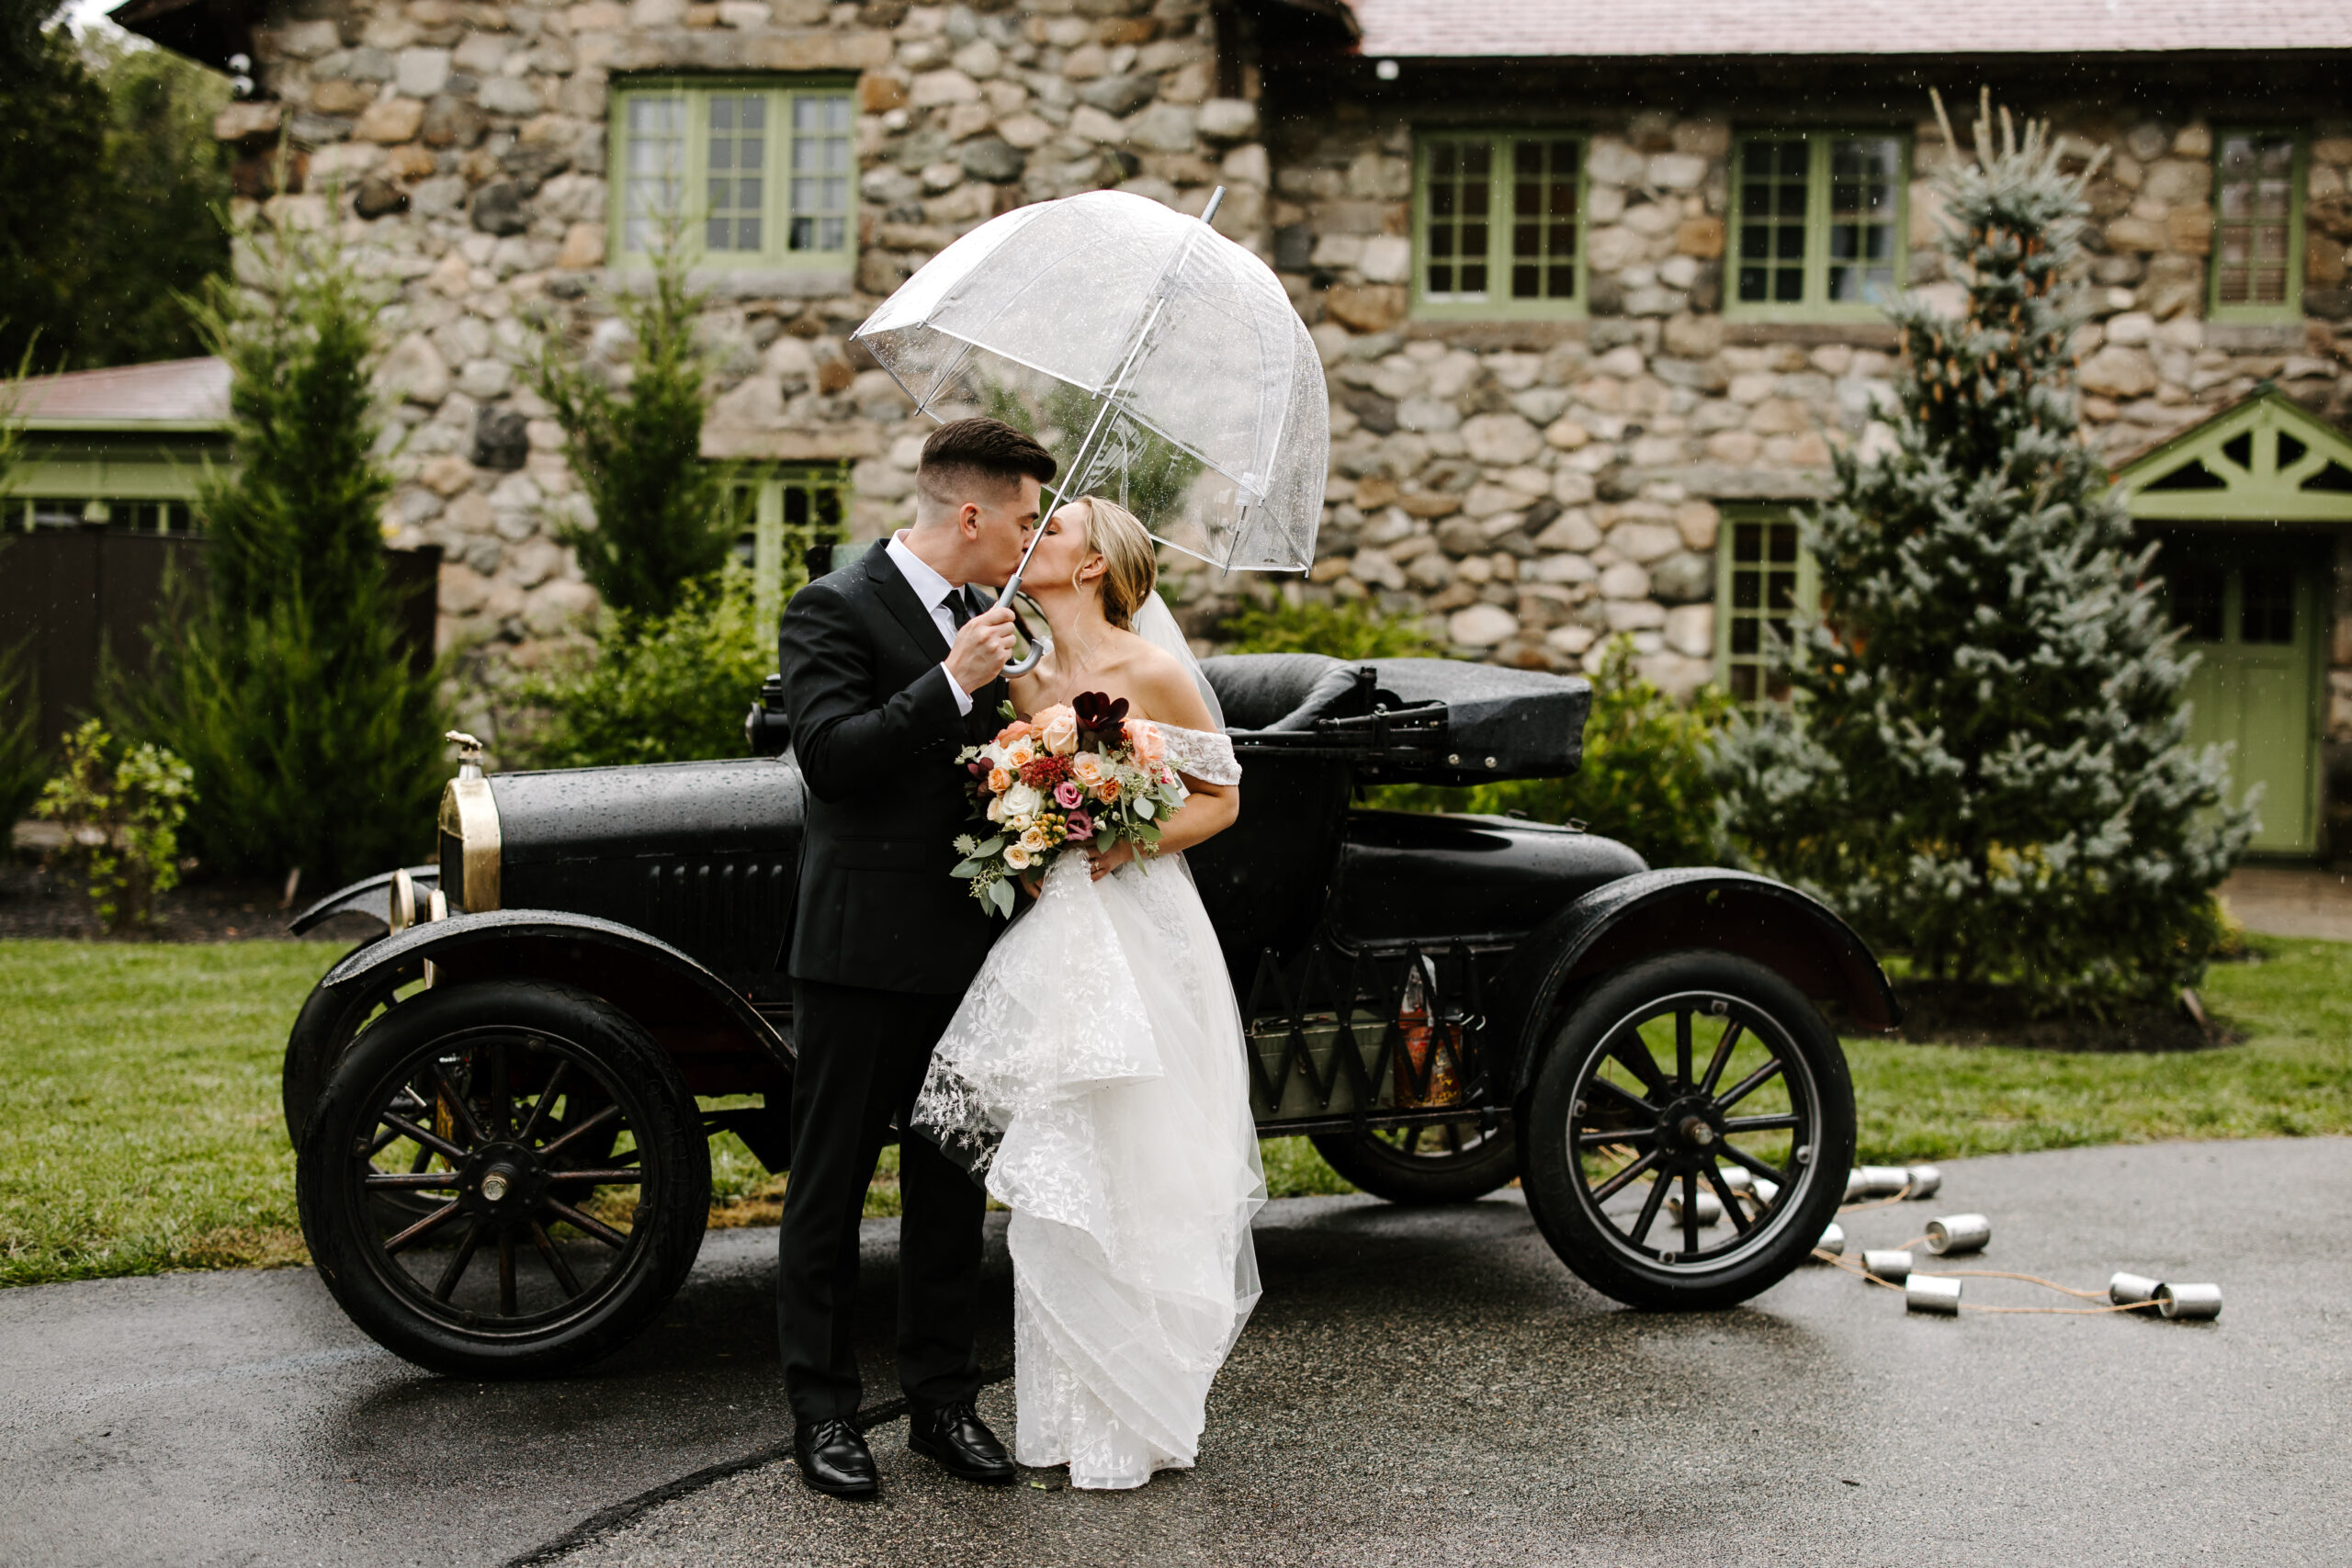 Bride and Groom kiss in front of vintage car during rainy wedding day at The Willowdale Estate